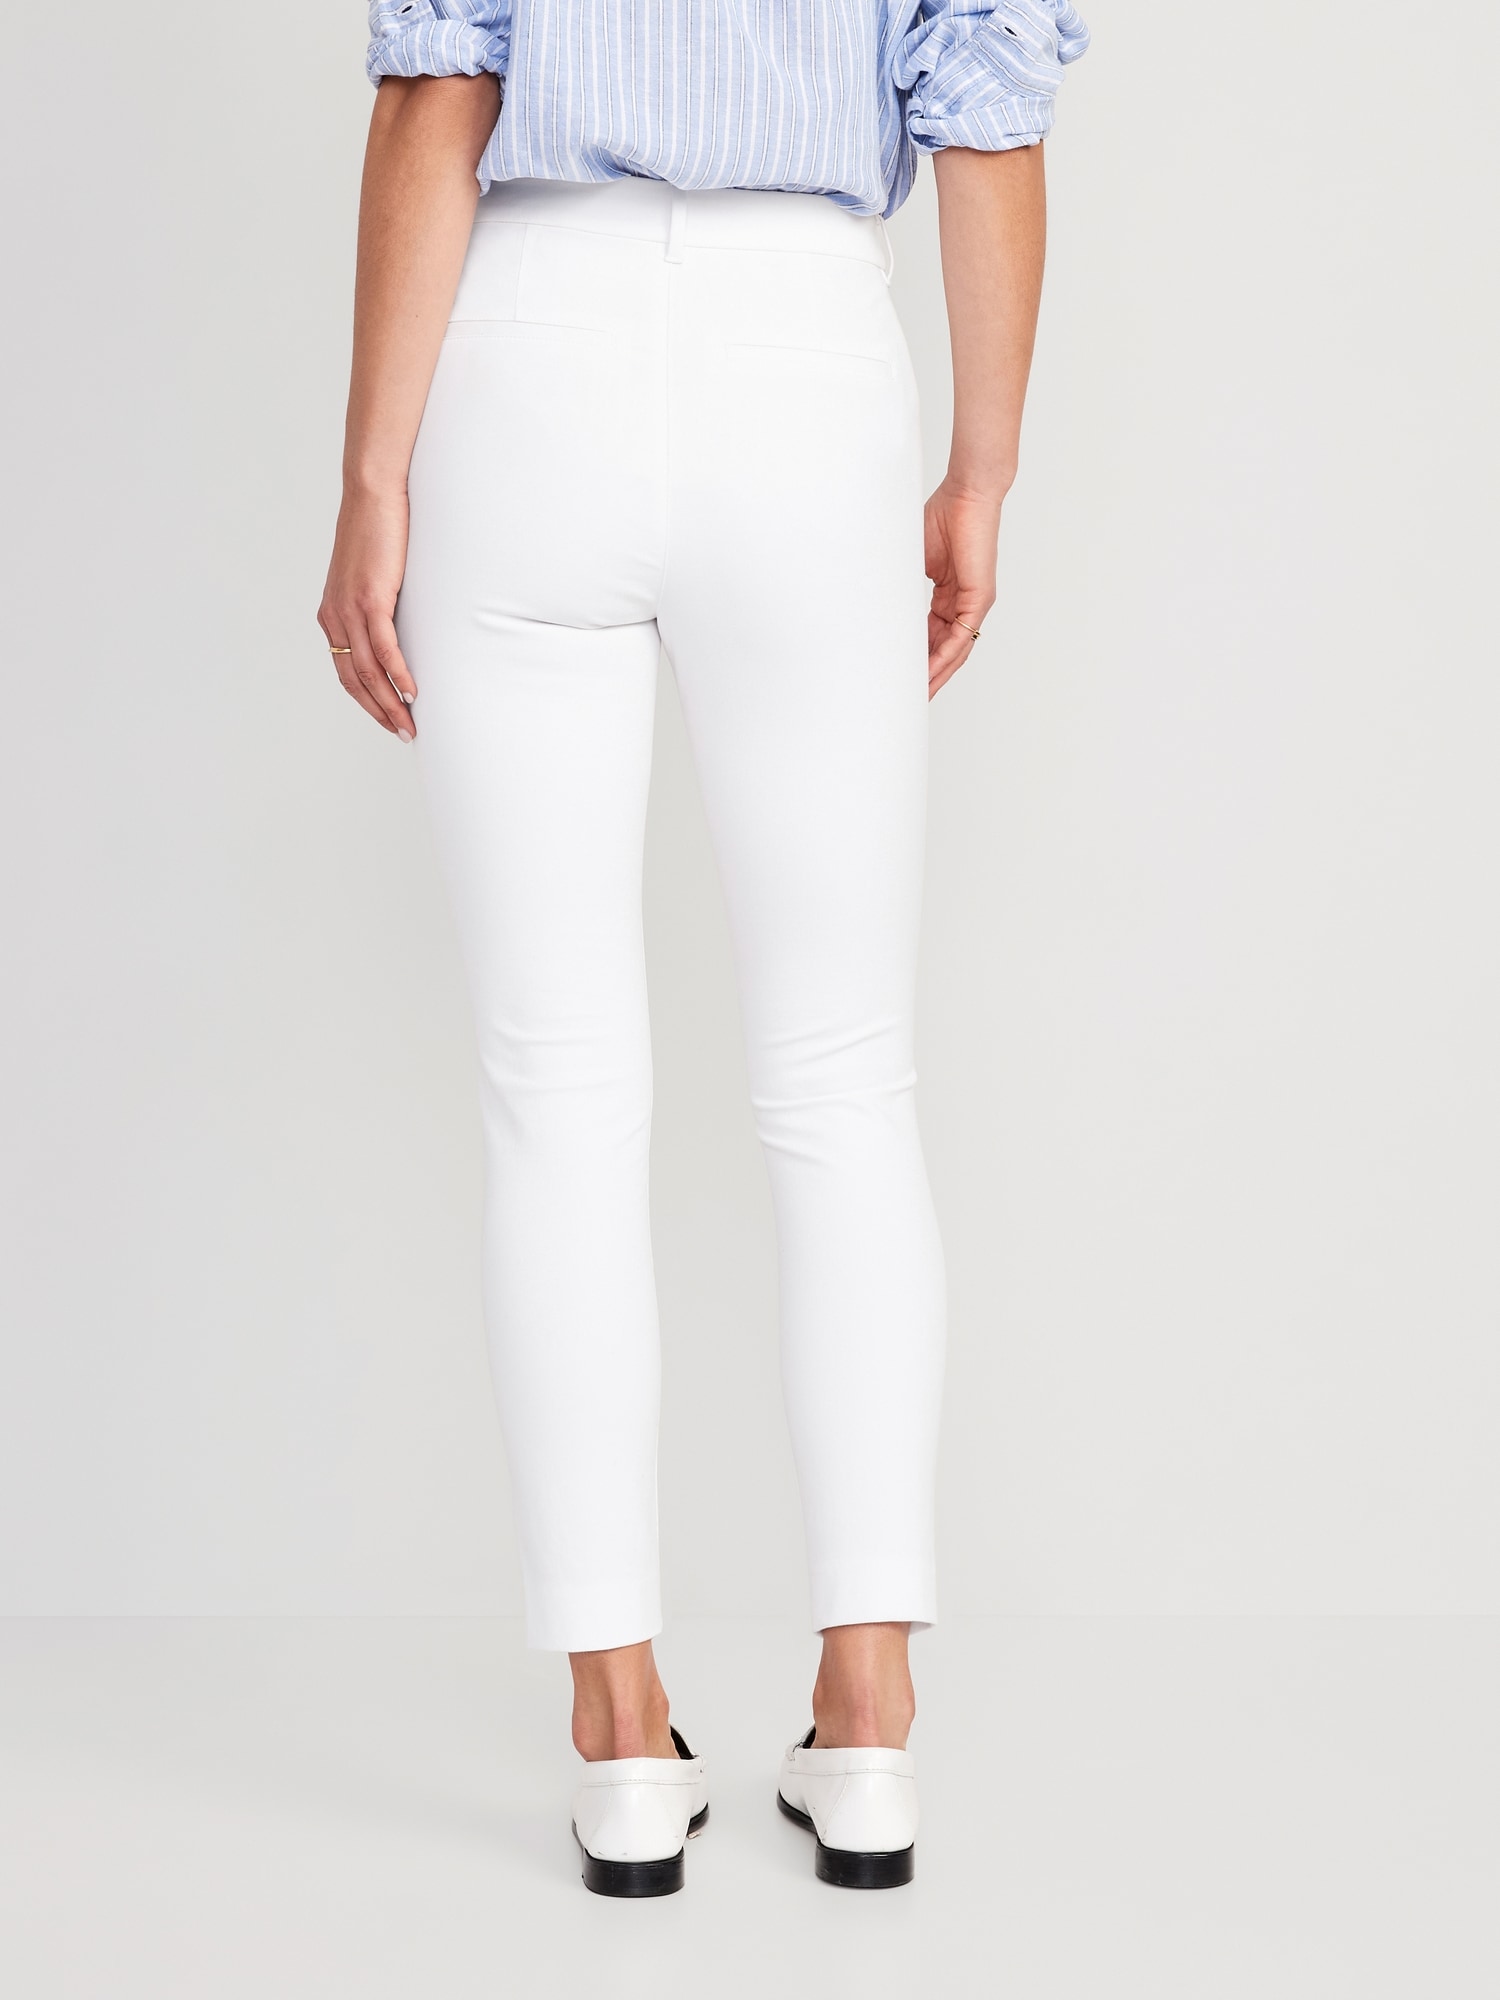 Buy BIBA White Womens Solid Ankle Length Pants | Shoppers Stop